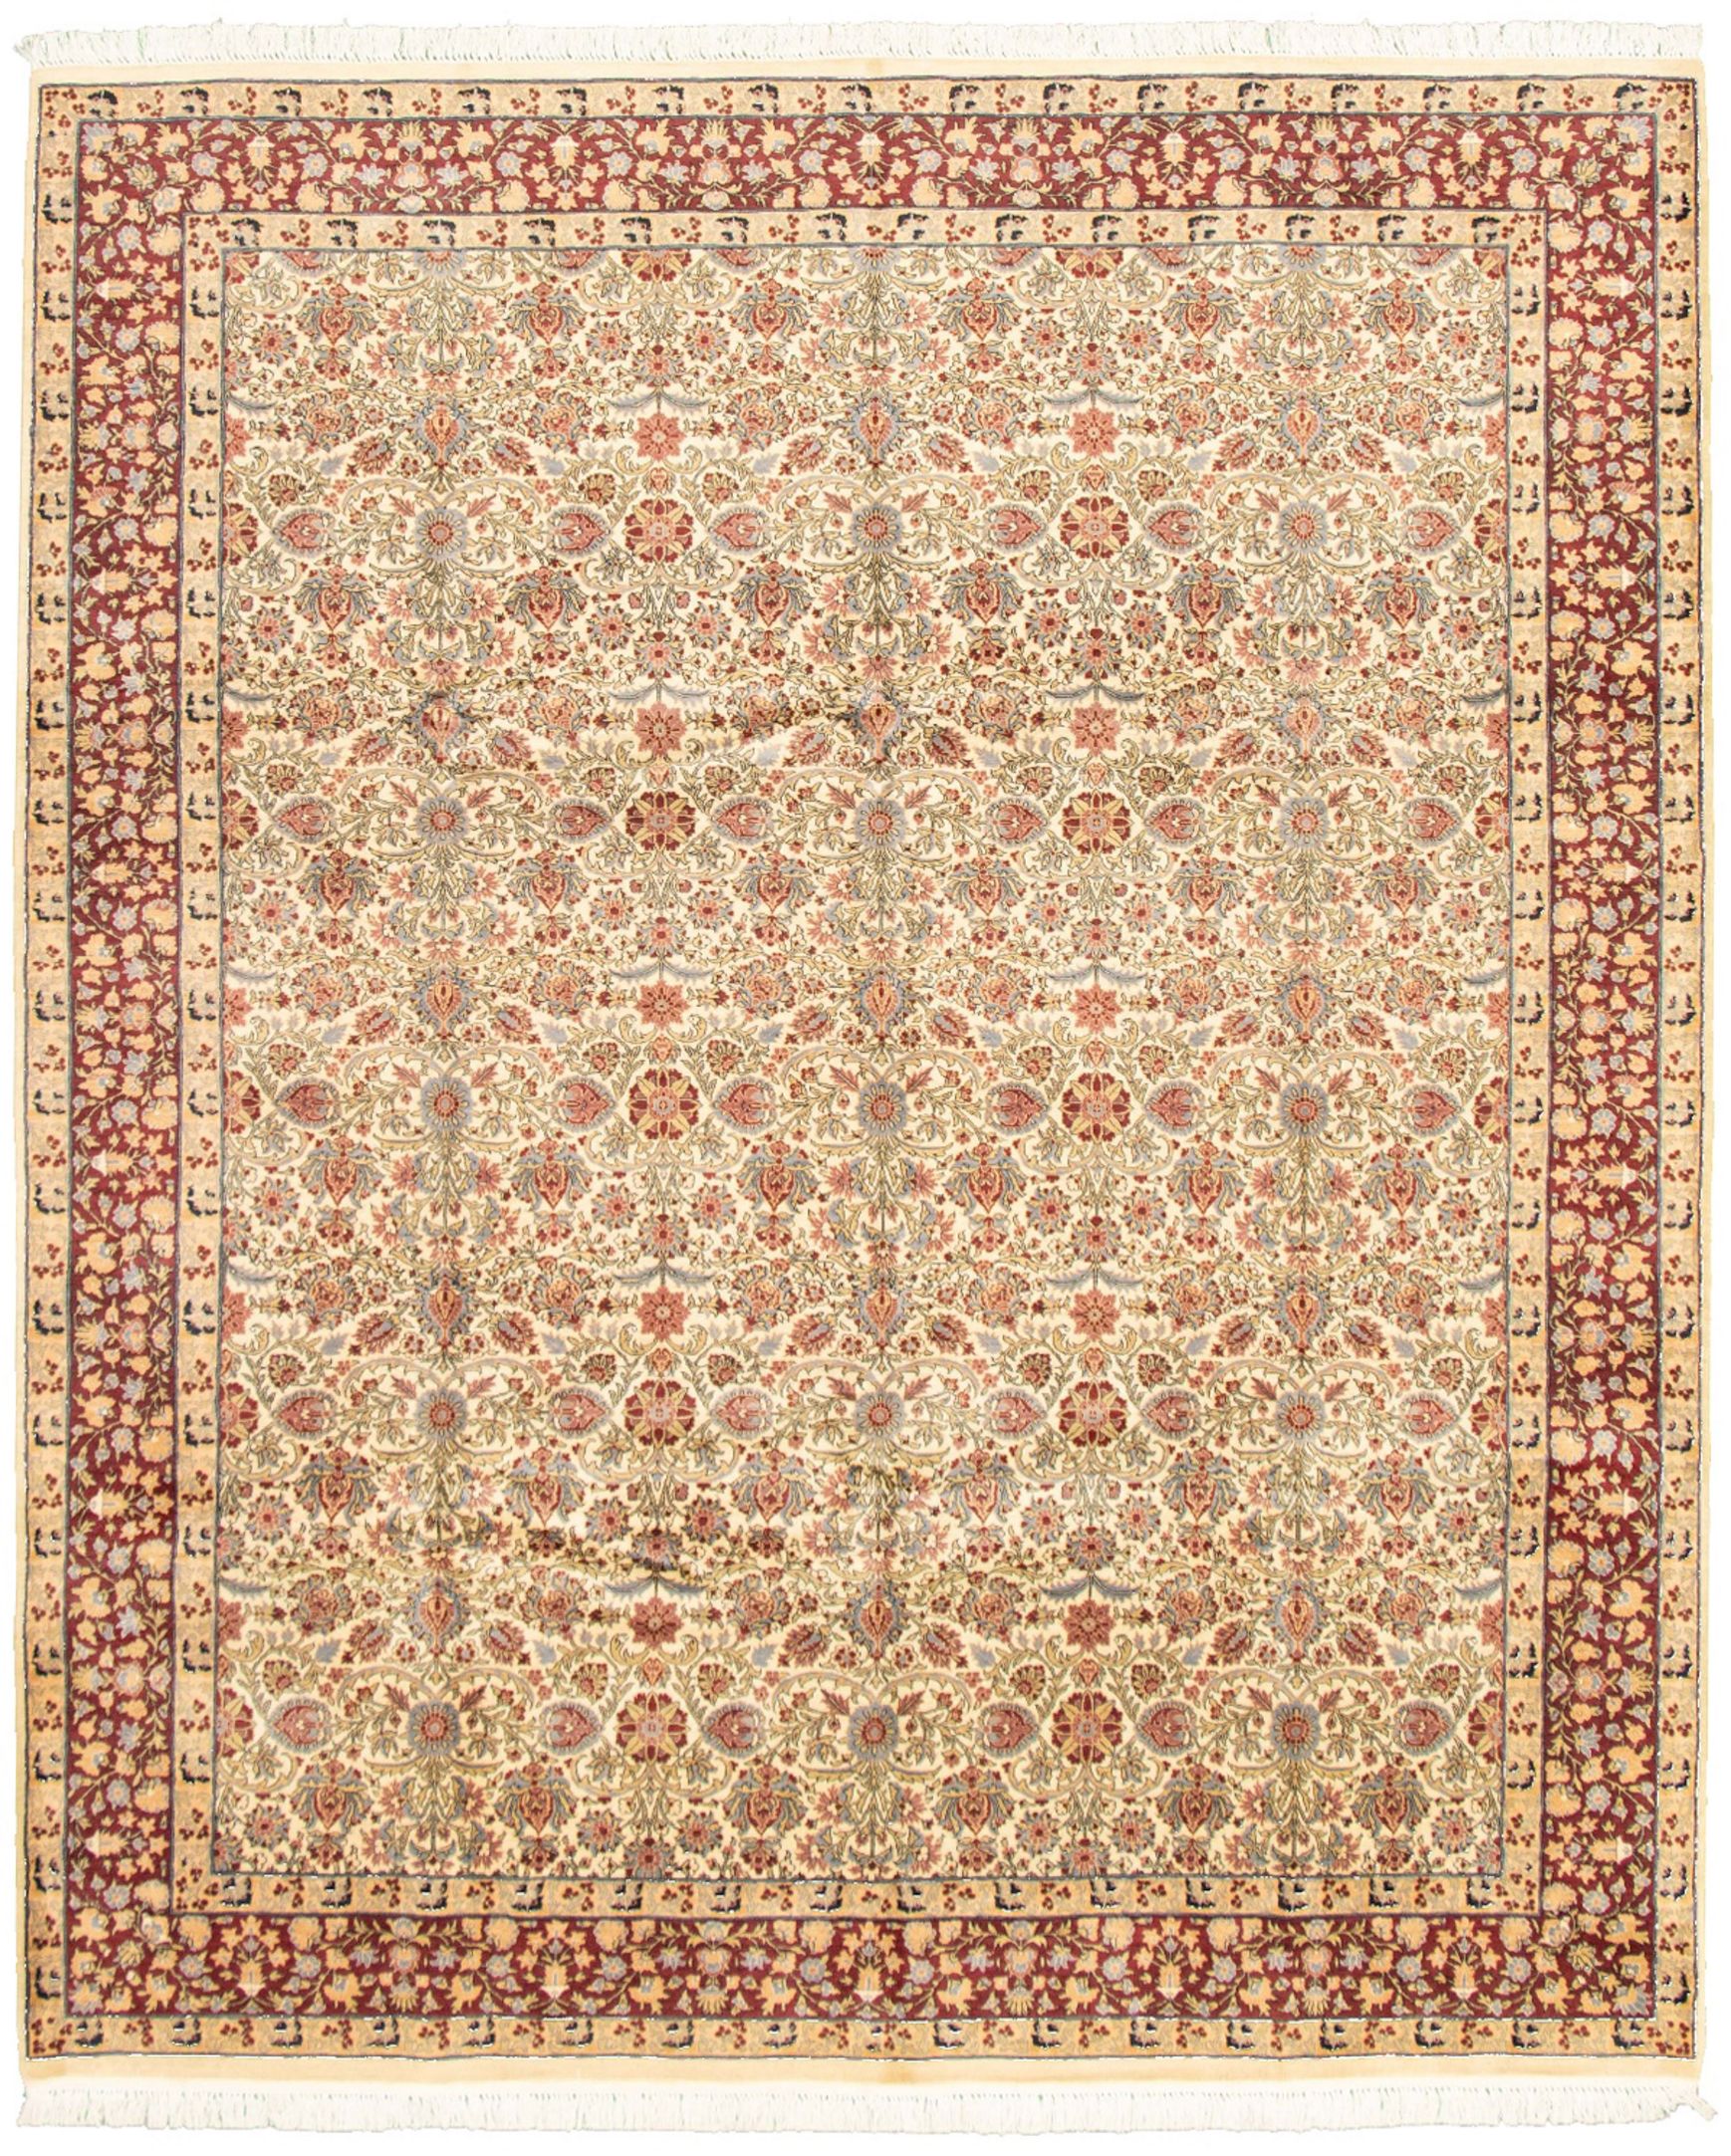 Hand-knotted Pako Persian 18/20 Cream Wool Rug 8'1" x 9'9" Size: 8'1" x 9'9"  